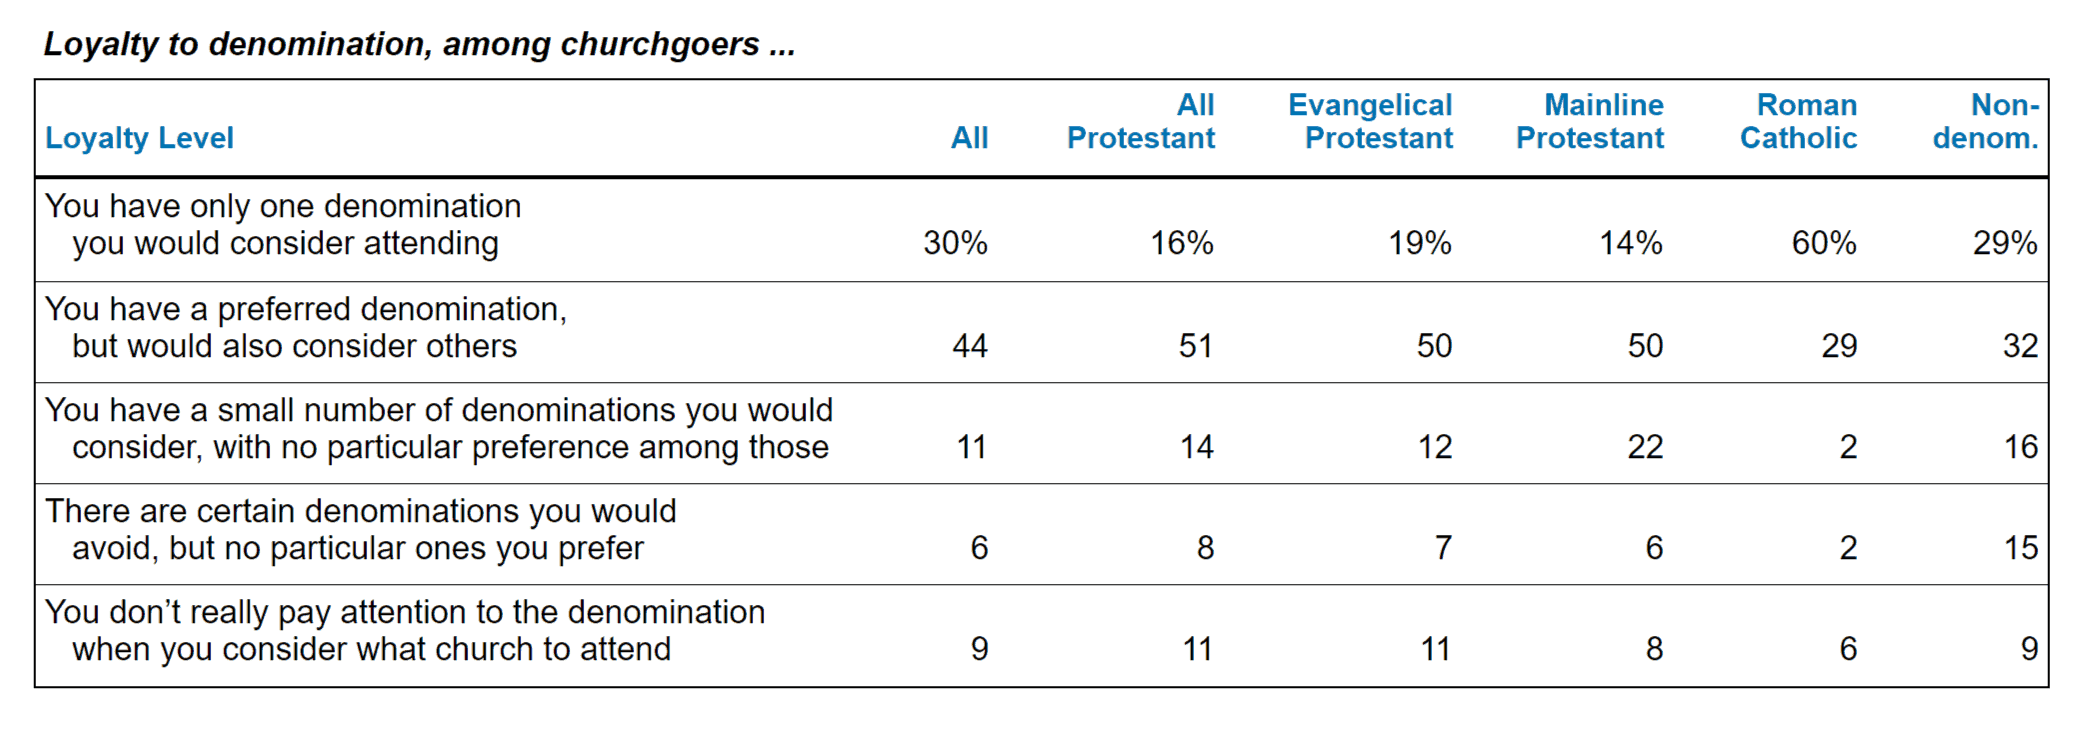 How loyal are churchgoers to their denomination?